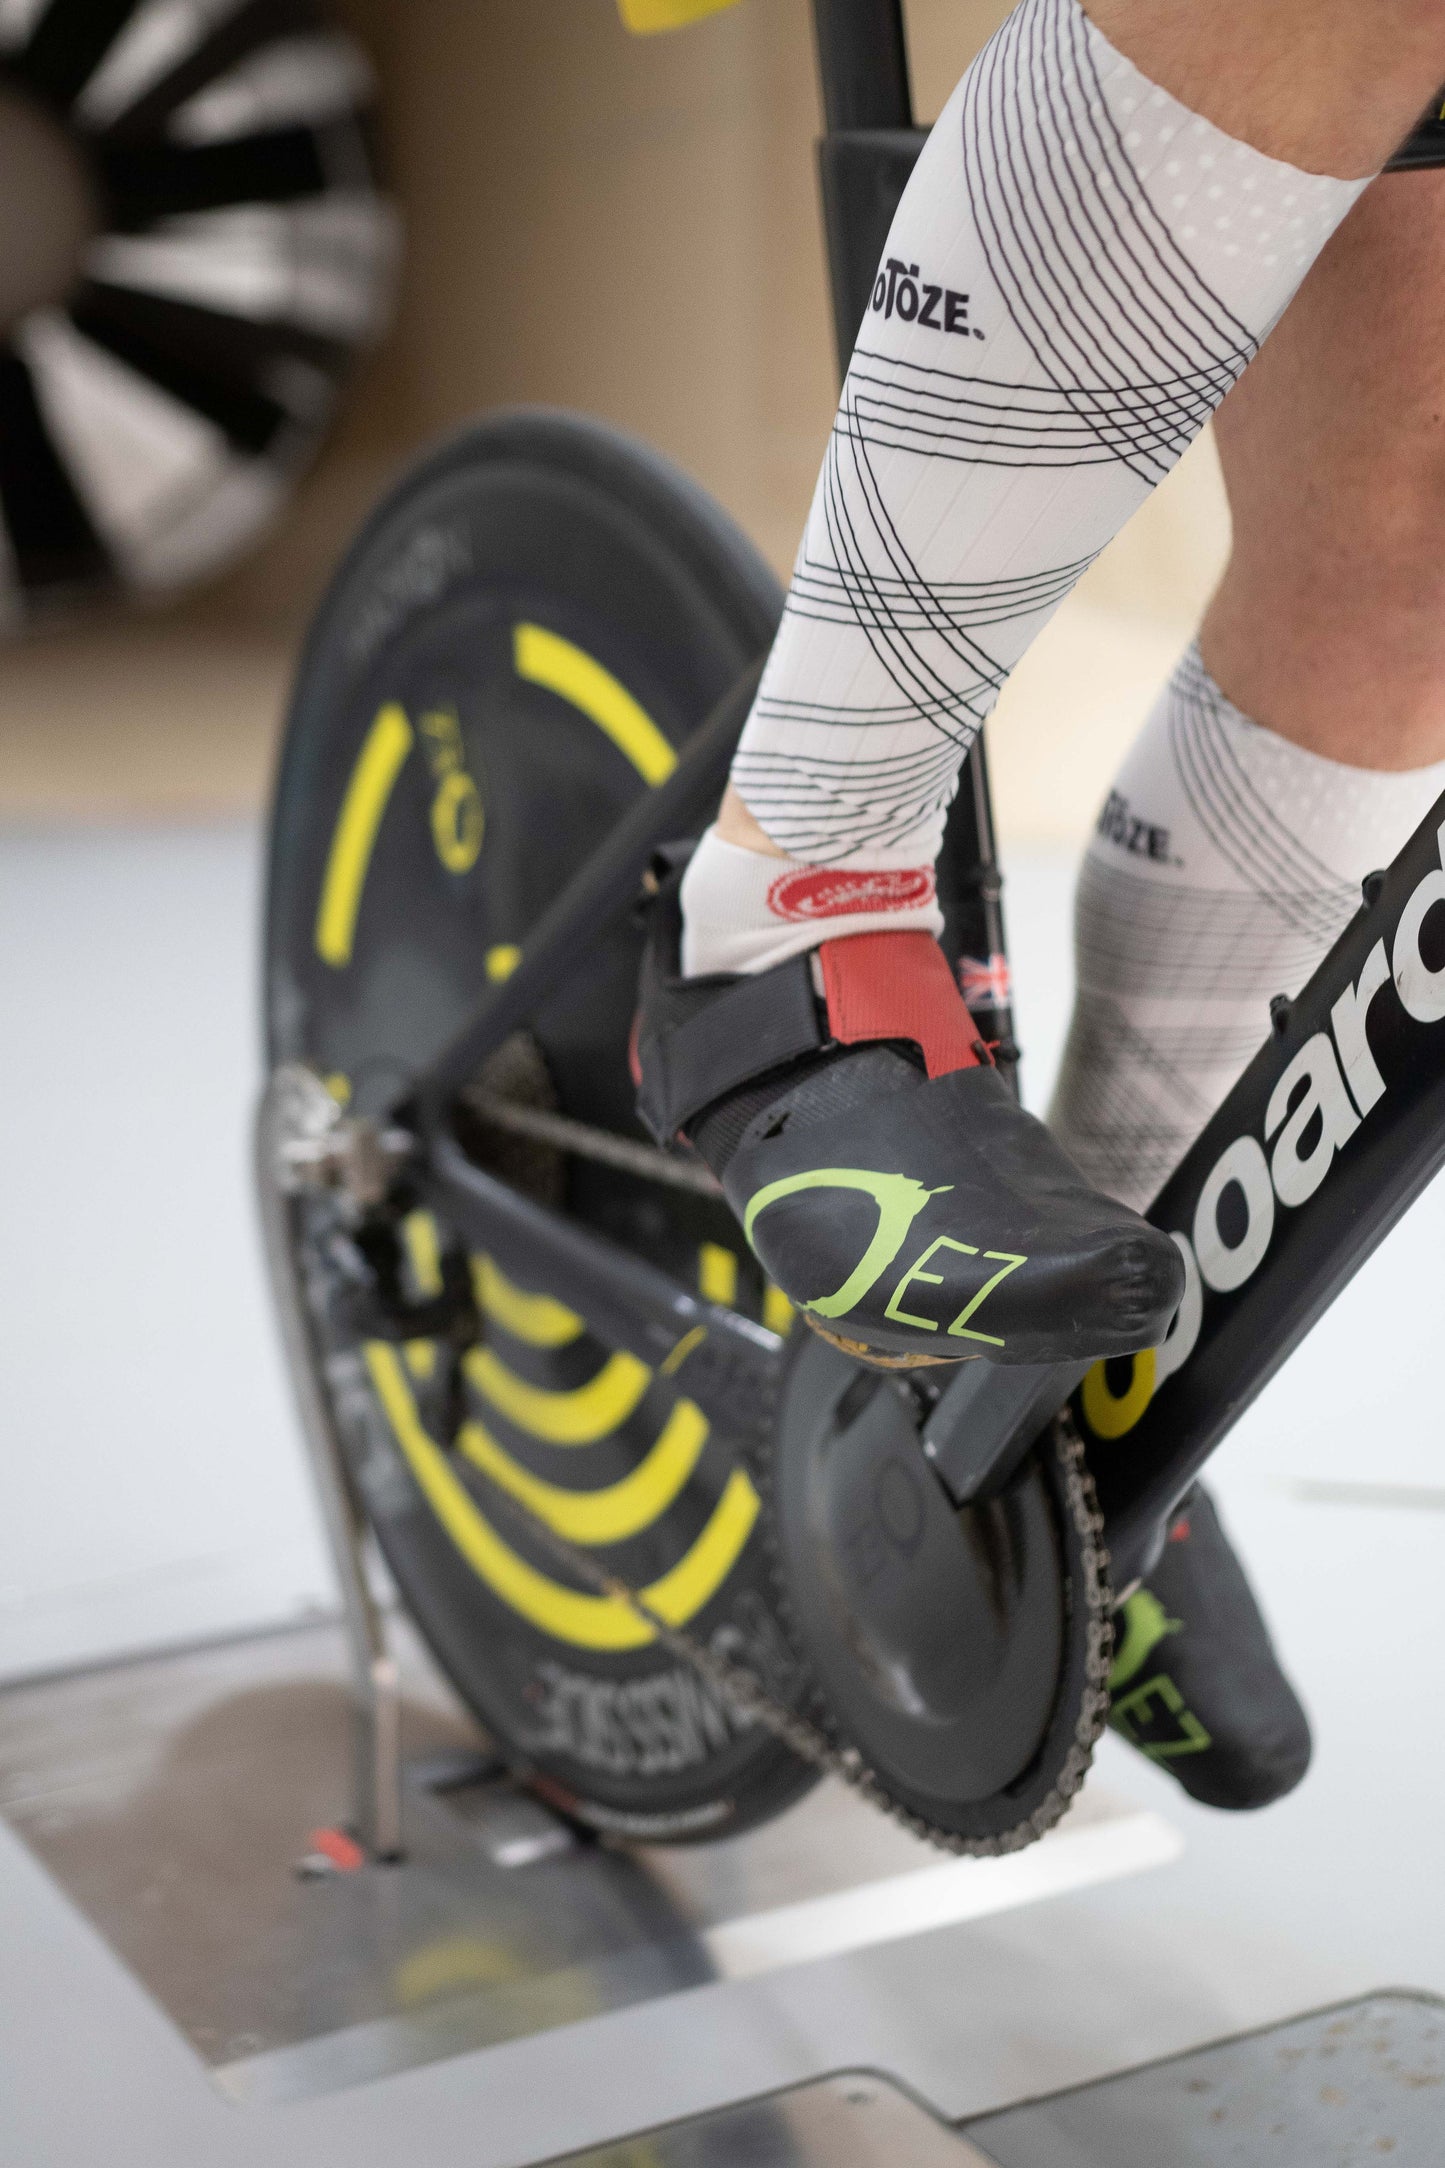 EZ Aero Toe Covers save 2-4 Watts ideal for triathlon customers, they also keep your toes warm. fully wind tunnel tested data on site.